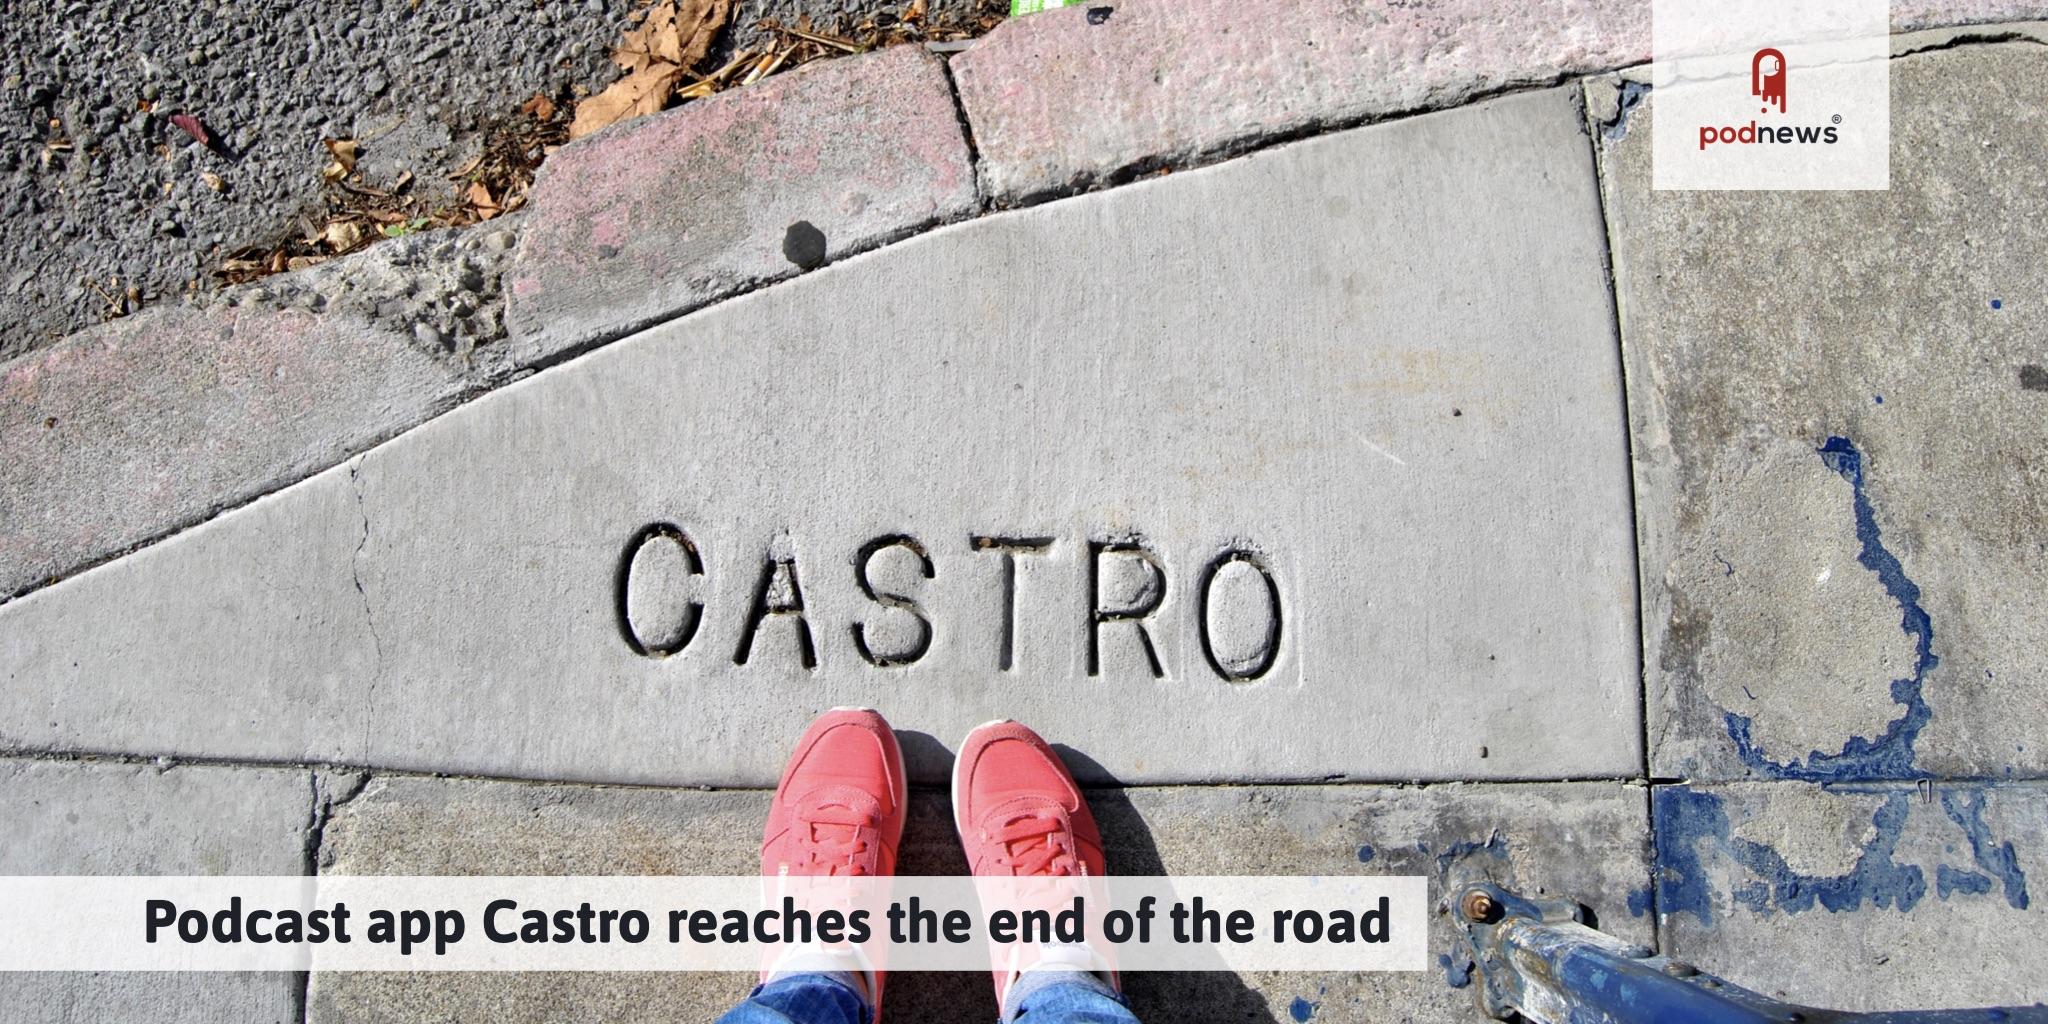 Podcast app Castro reaches the end of the road